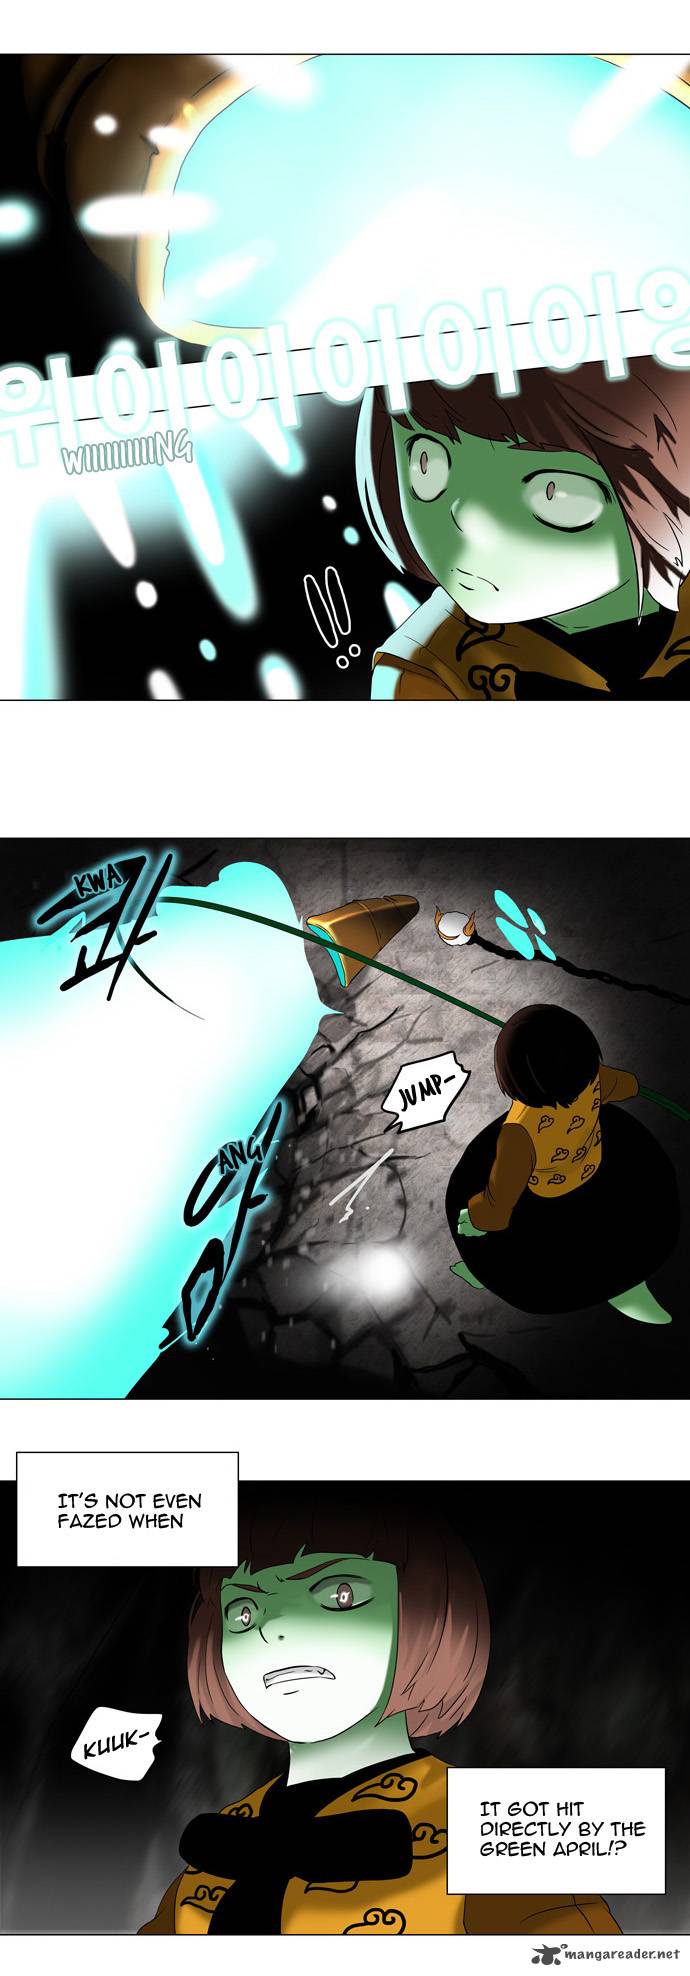 Tower Of God 65 18